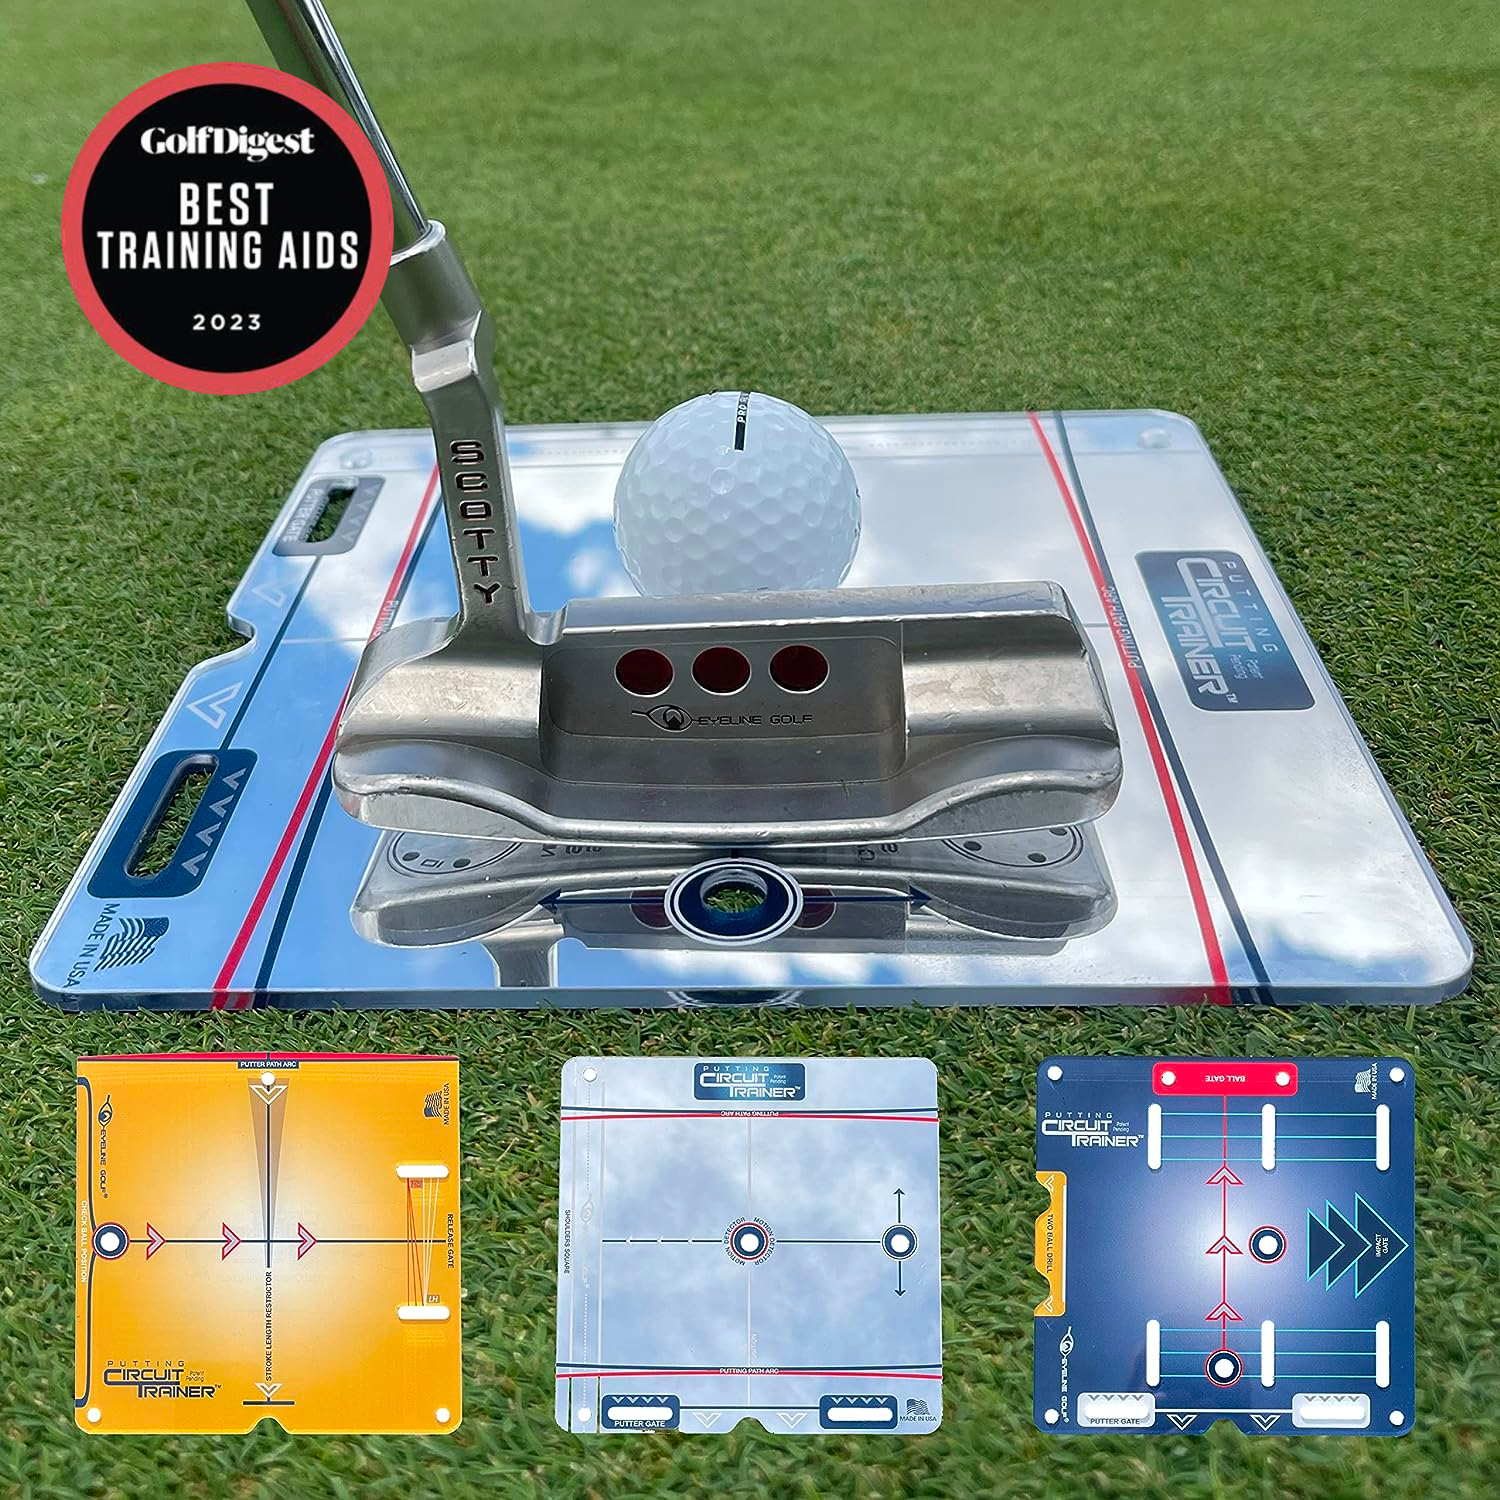 Most Popular Golf Training Aids Among Top Tour Players and 